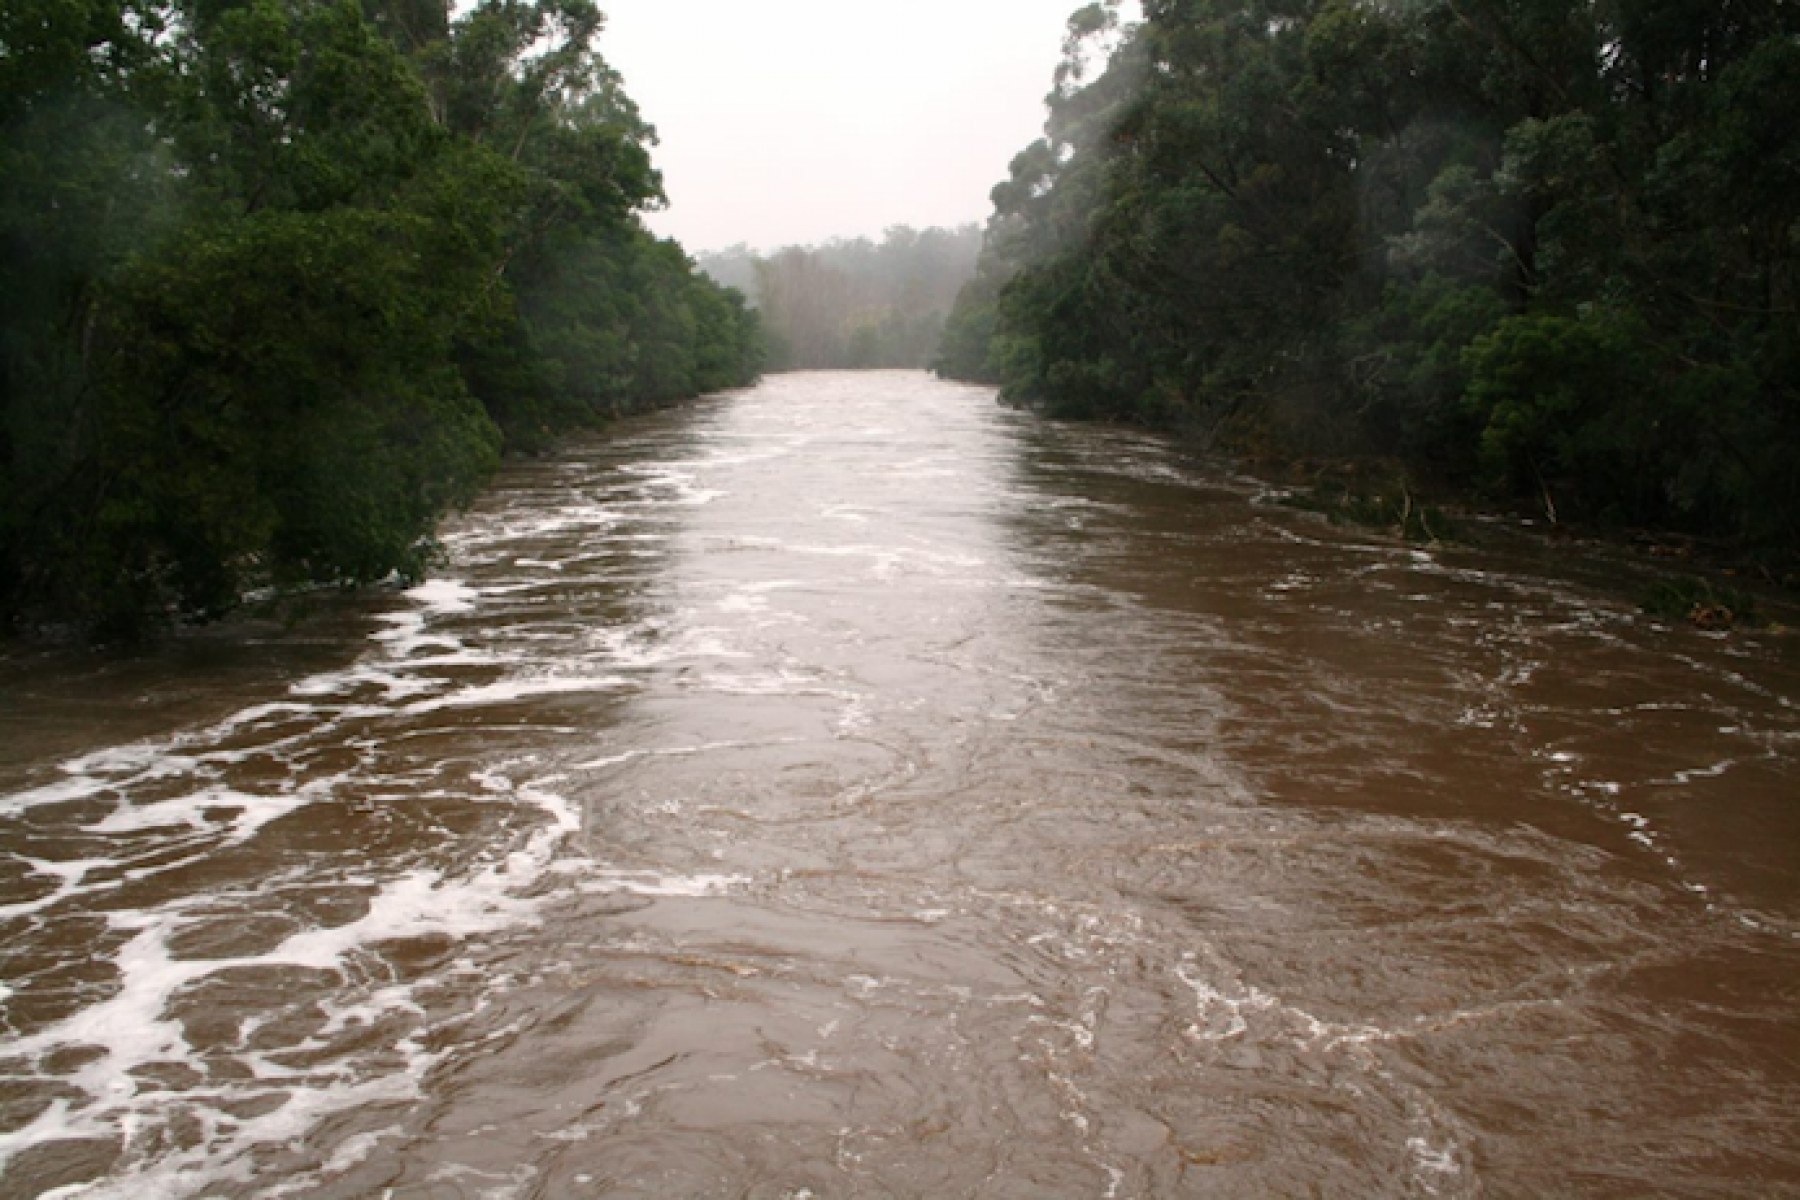 A photo of banks overflowed at Caan River, Australia.